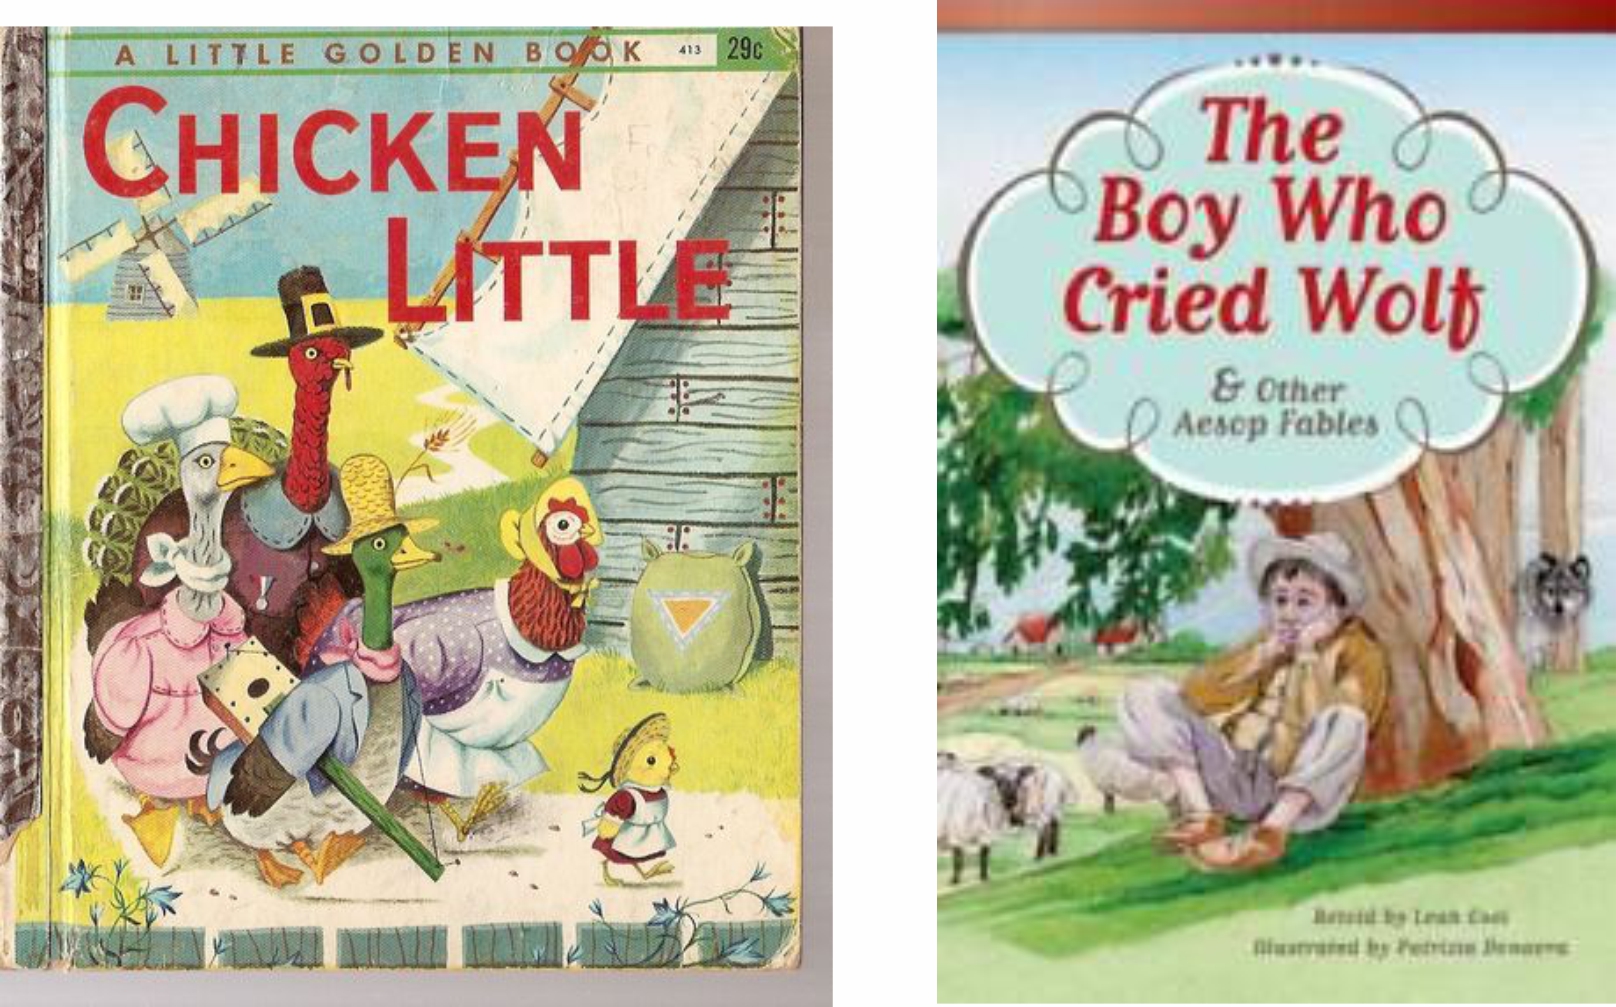 Chicken Little meets the boy who cried wolf